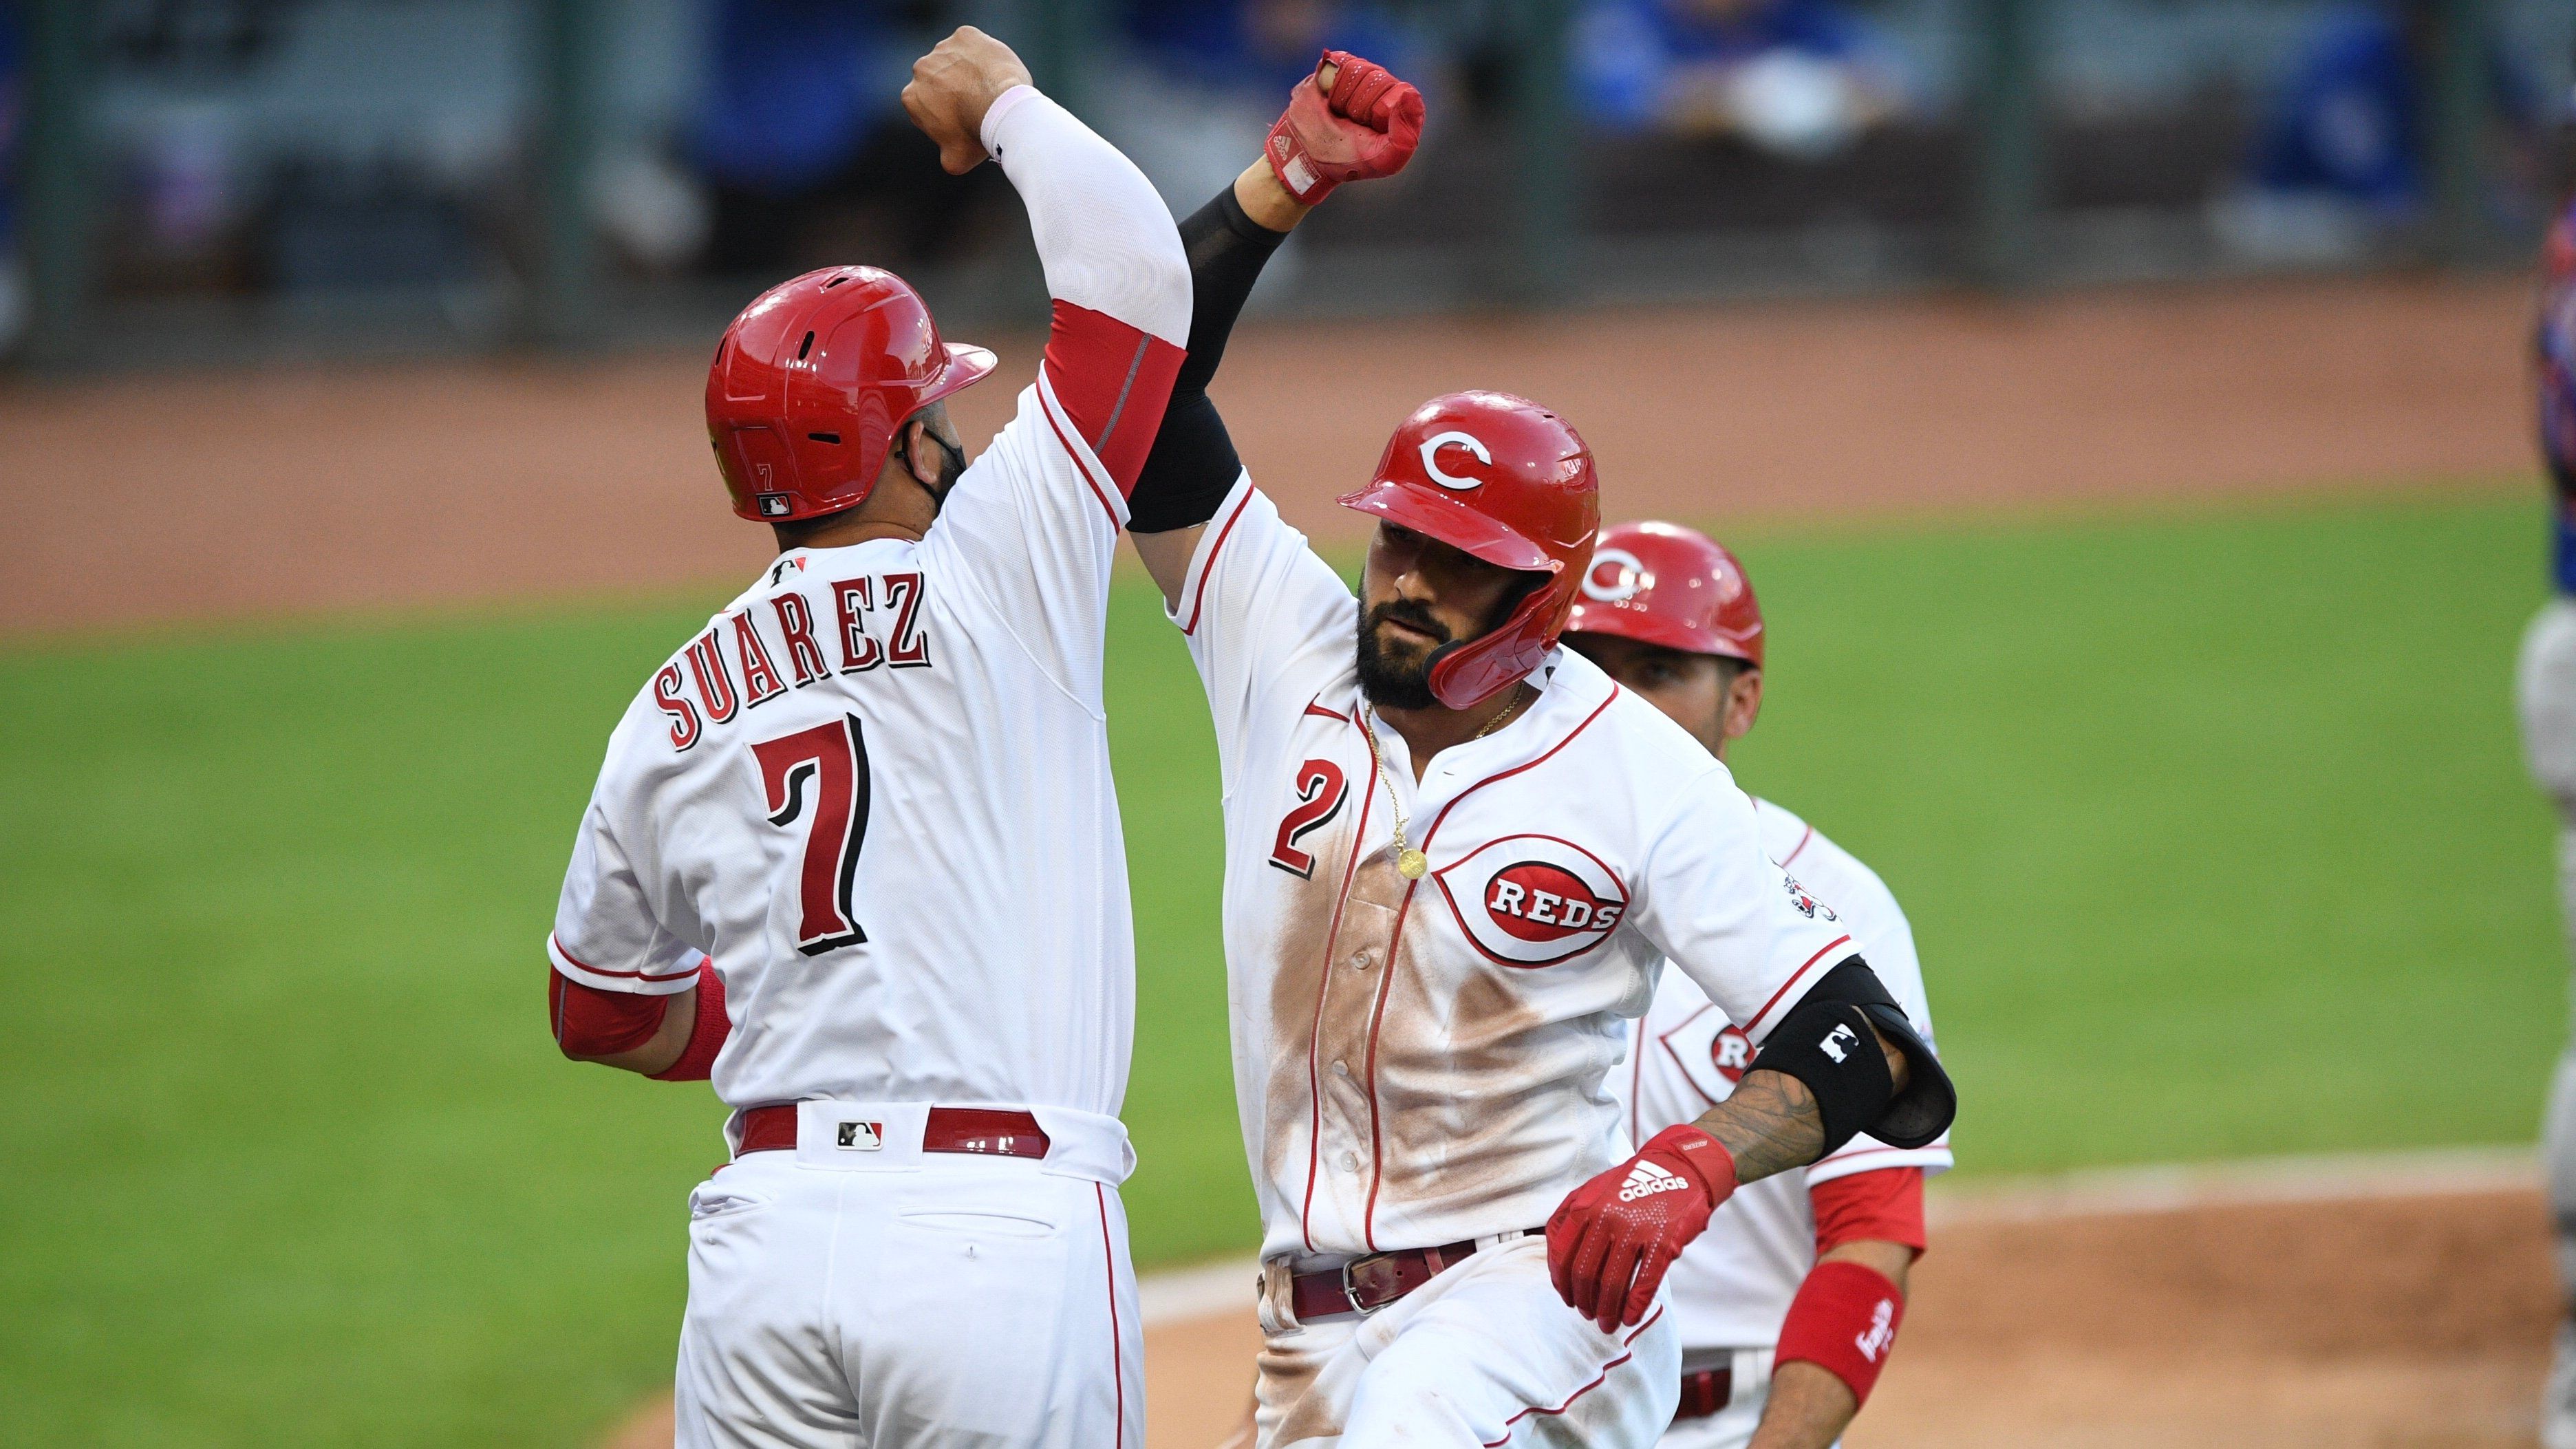 Expectations are high for Nick Castellanos, Cincinnati Reds in 2020